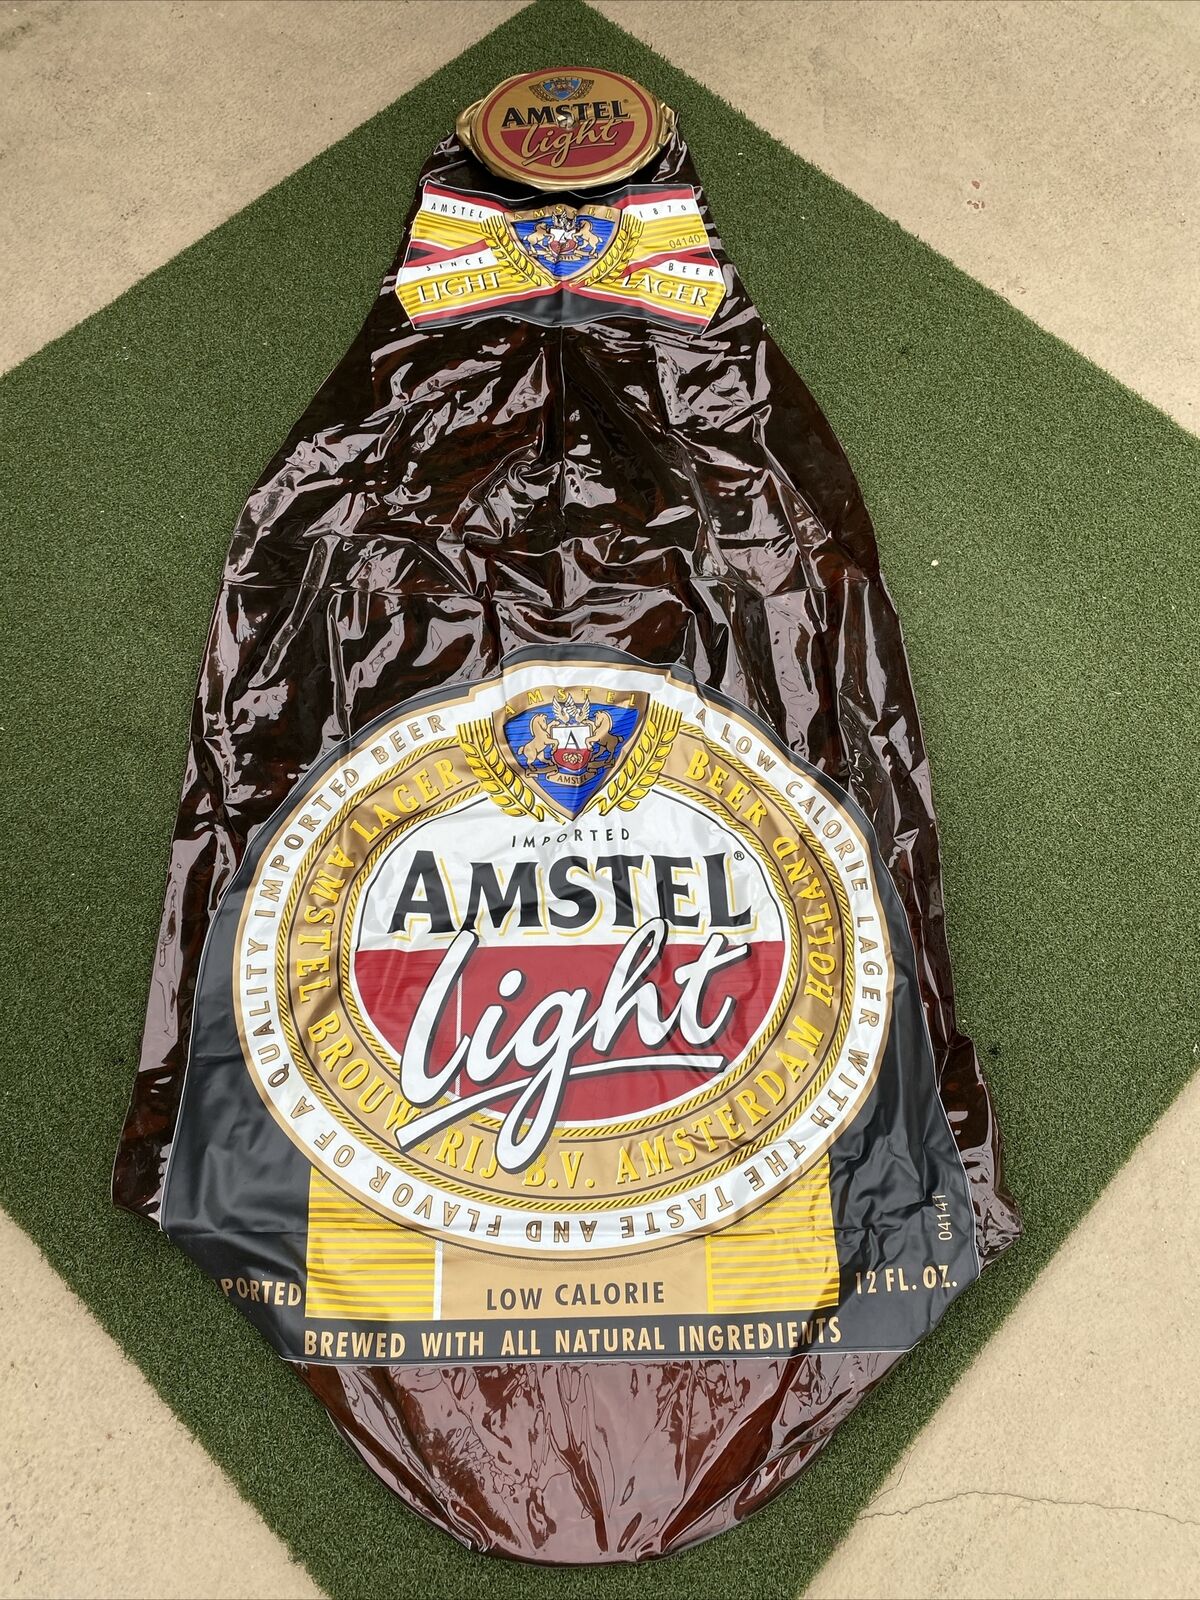 Large 5Ft Promotional Blow-Up Amstel Light Beer Bottle Man Cave Party Photos NOS